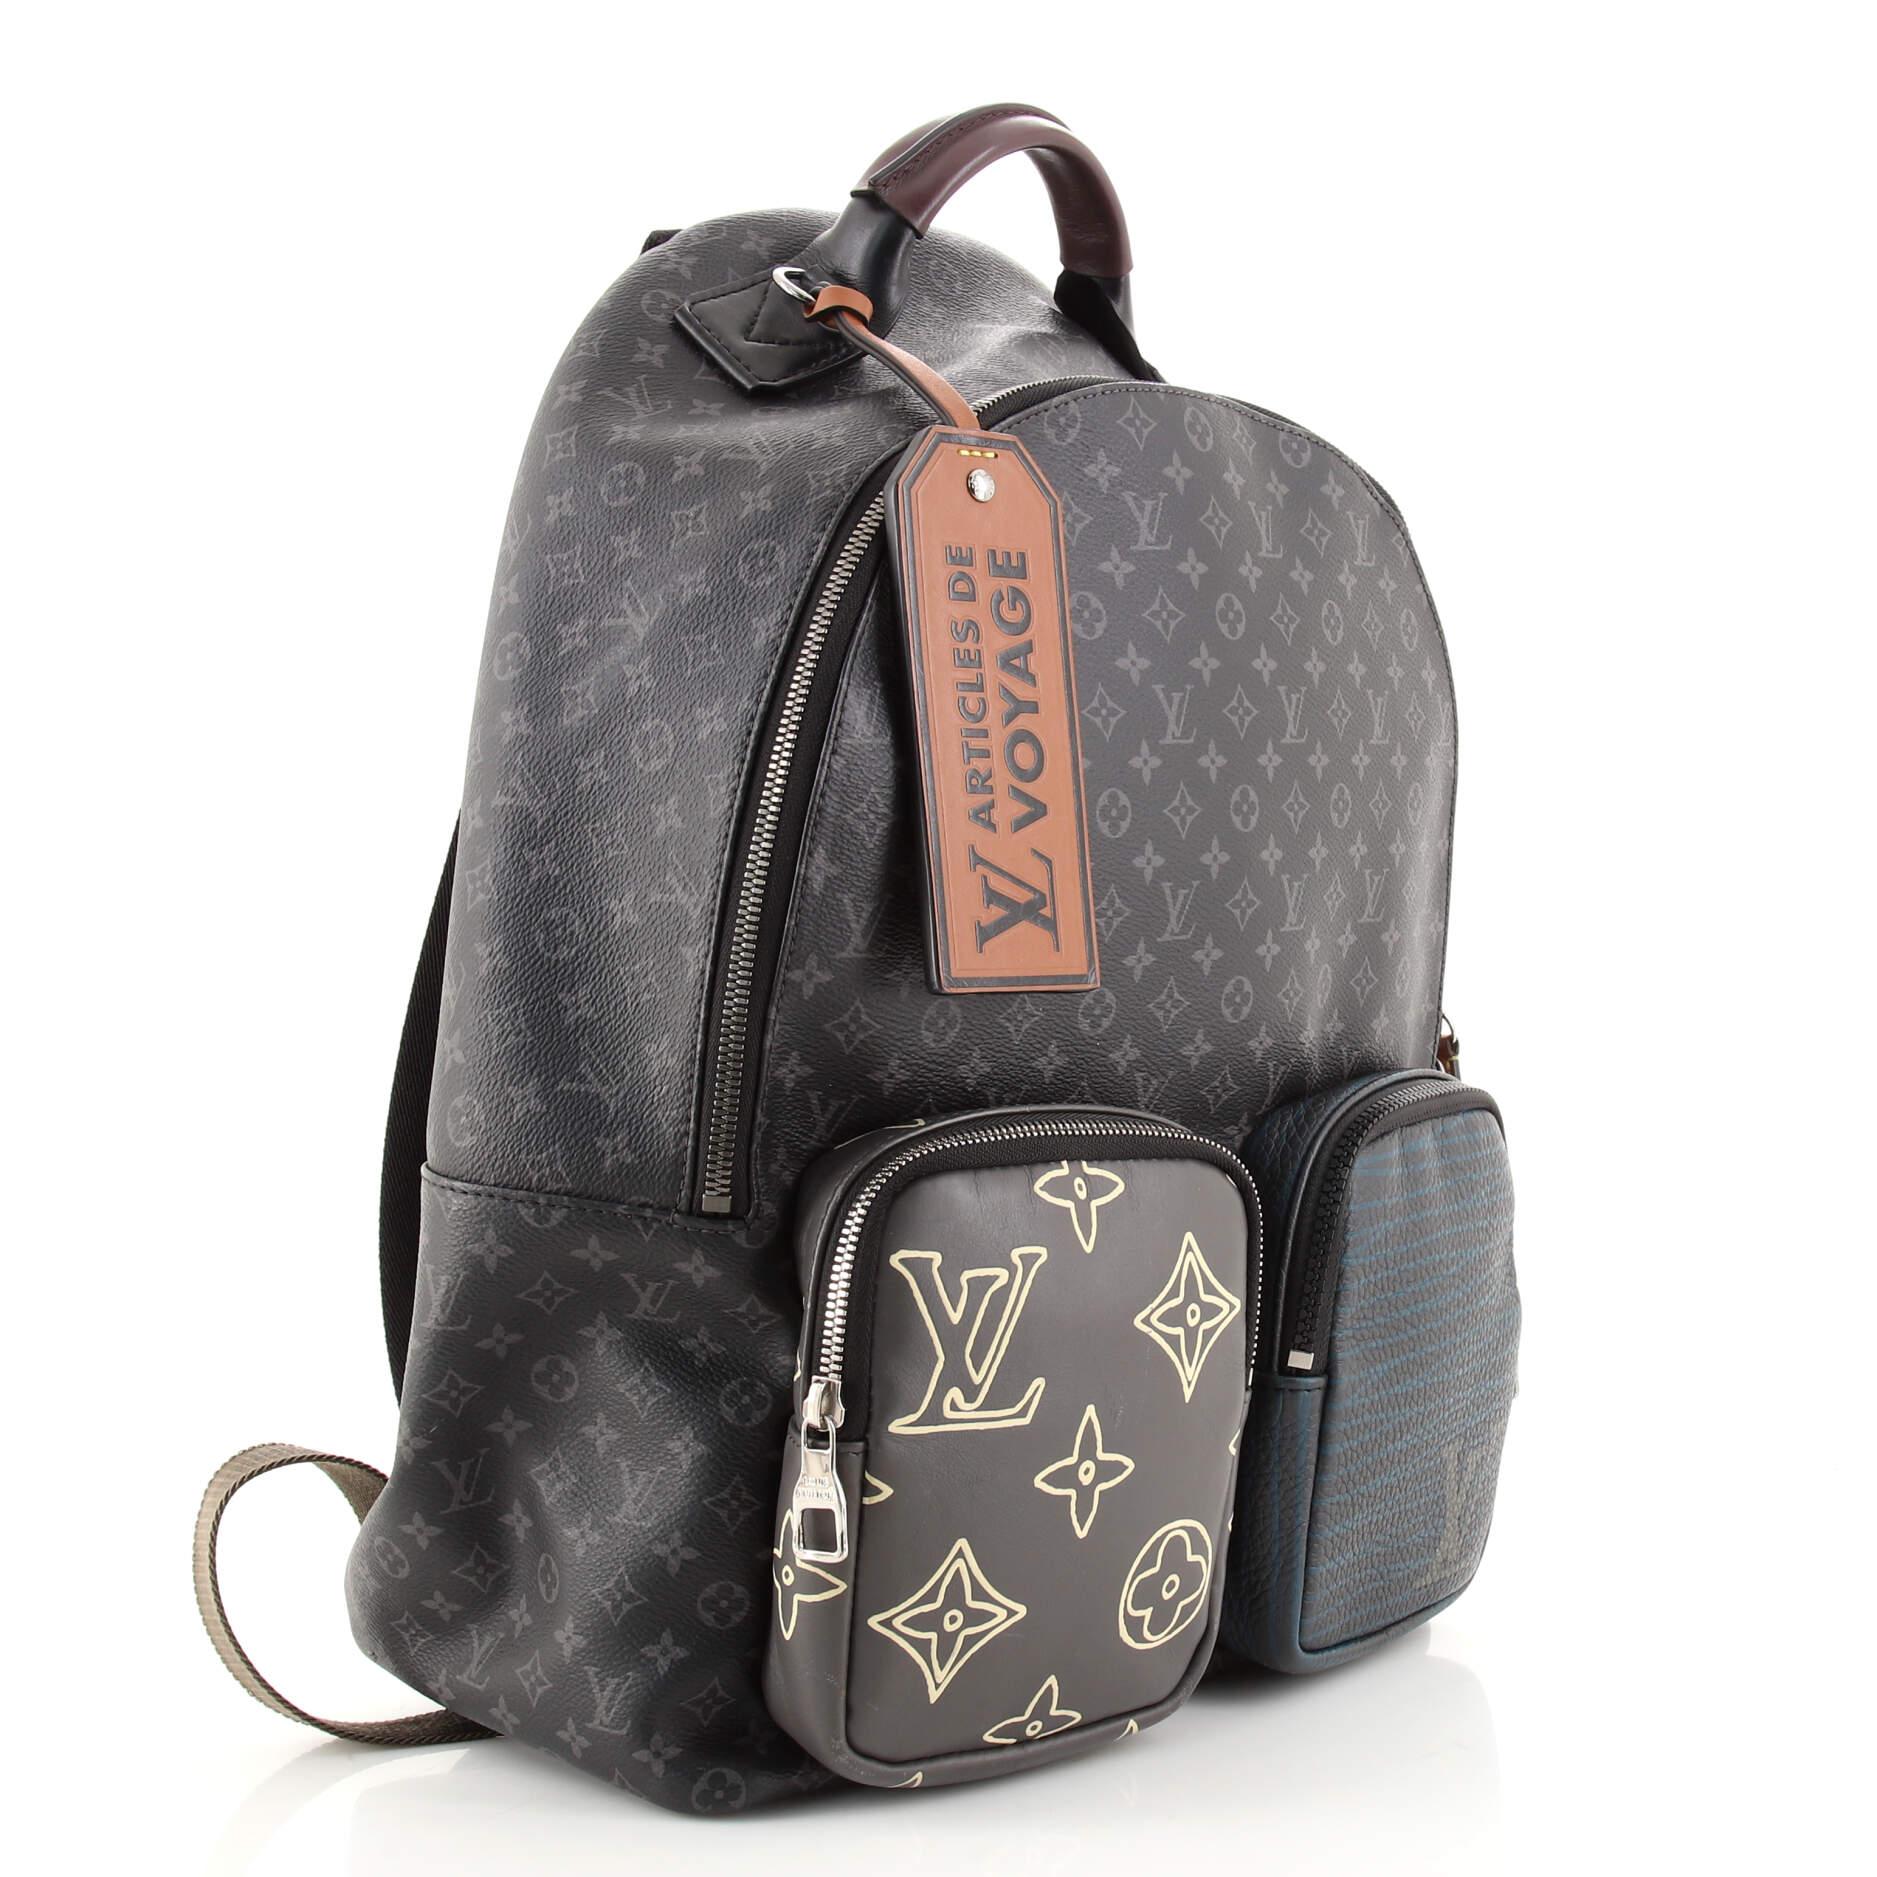 Louis Vuitton Multipocket - 3 For Sale on 1stDibs  lv articles de voyage  backpack, multipoches louis vuitton, multipocket louis vuitton